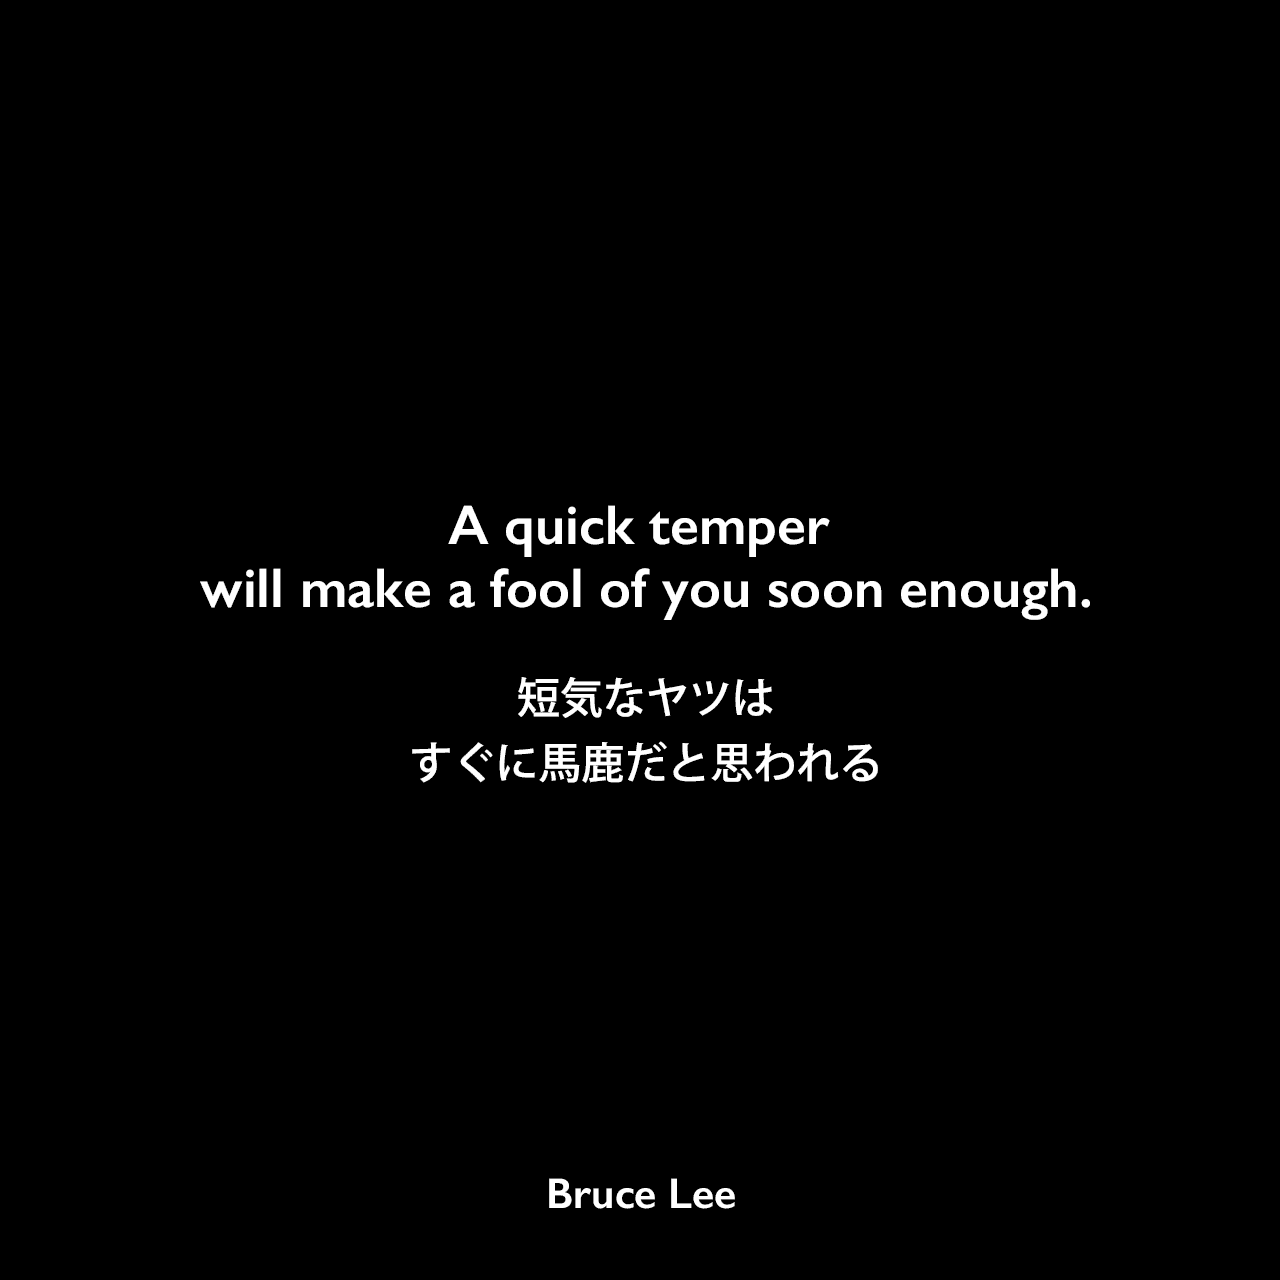 A quick temper will make a fool of you soon enough.短気なヤツはすぐに馬鹿だと思われるBruce Lee